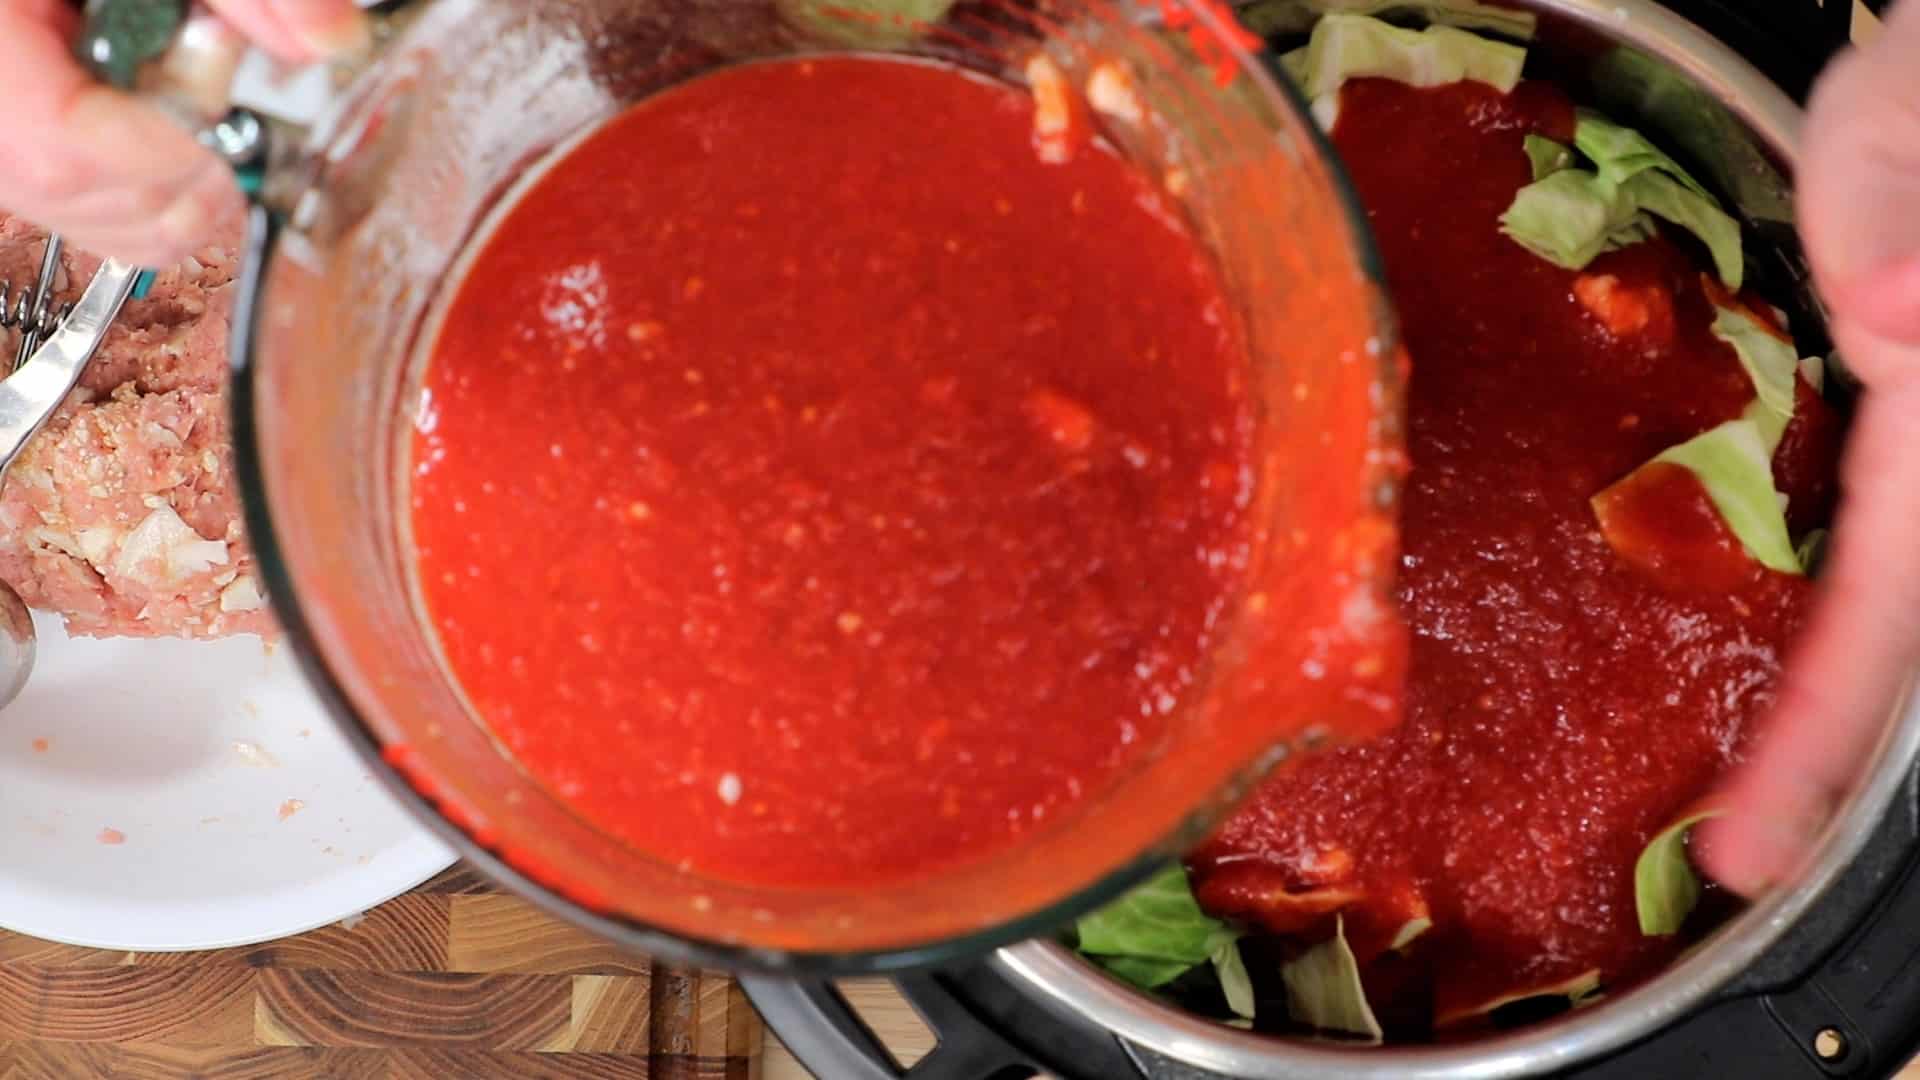 Carefully Pour in Half the Sauce